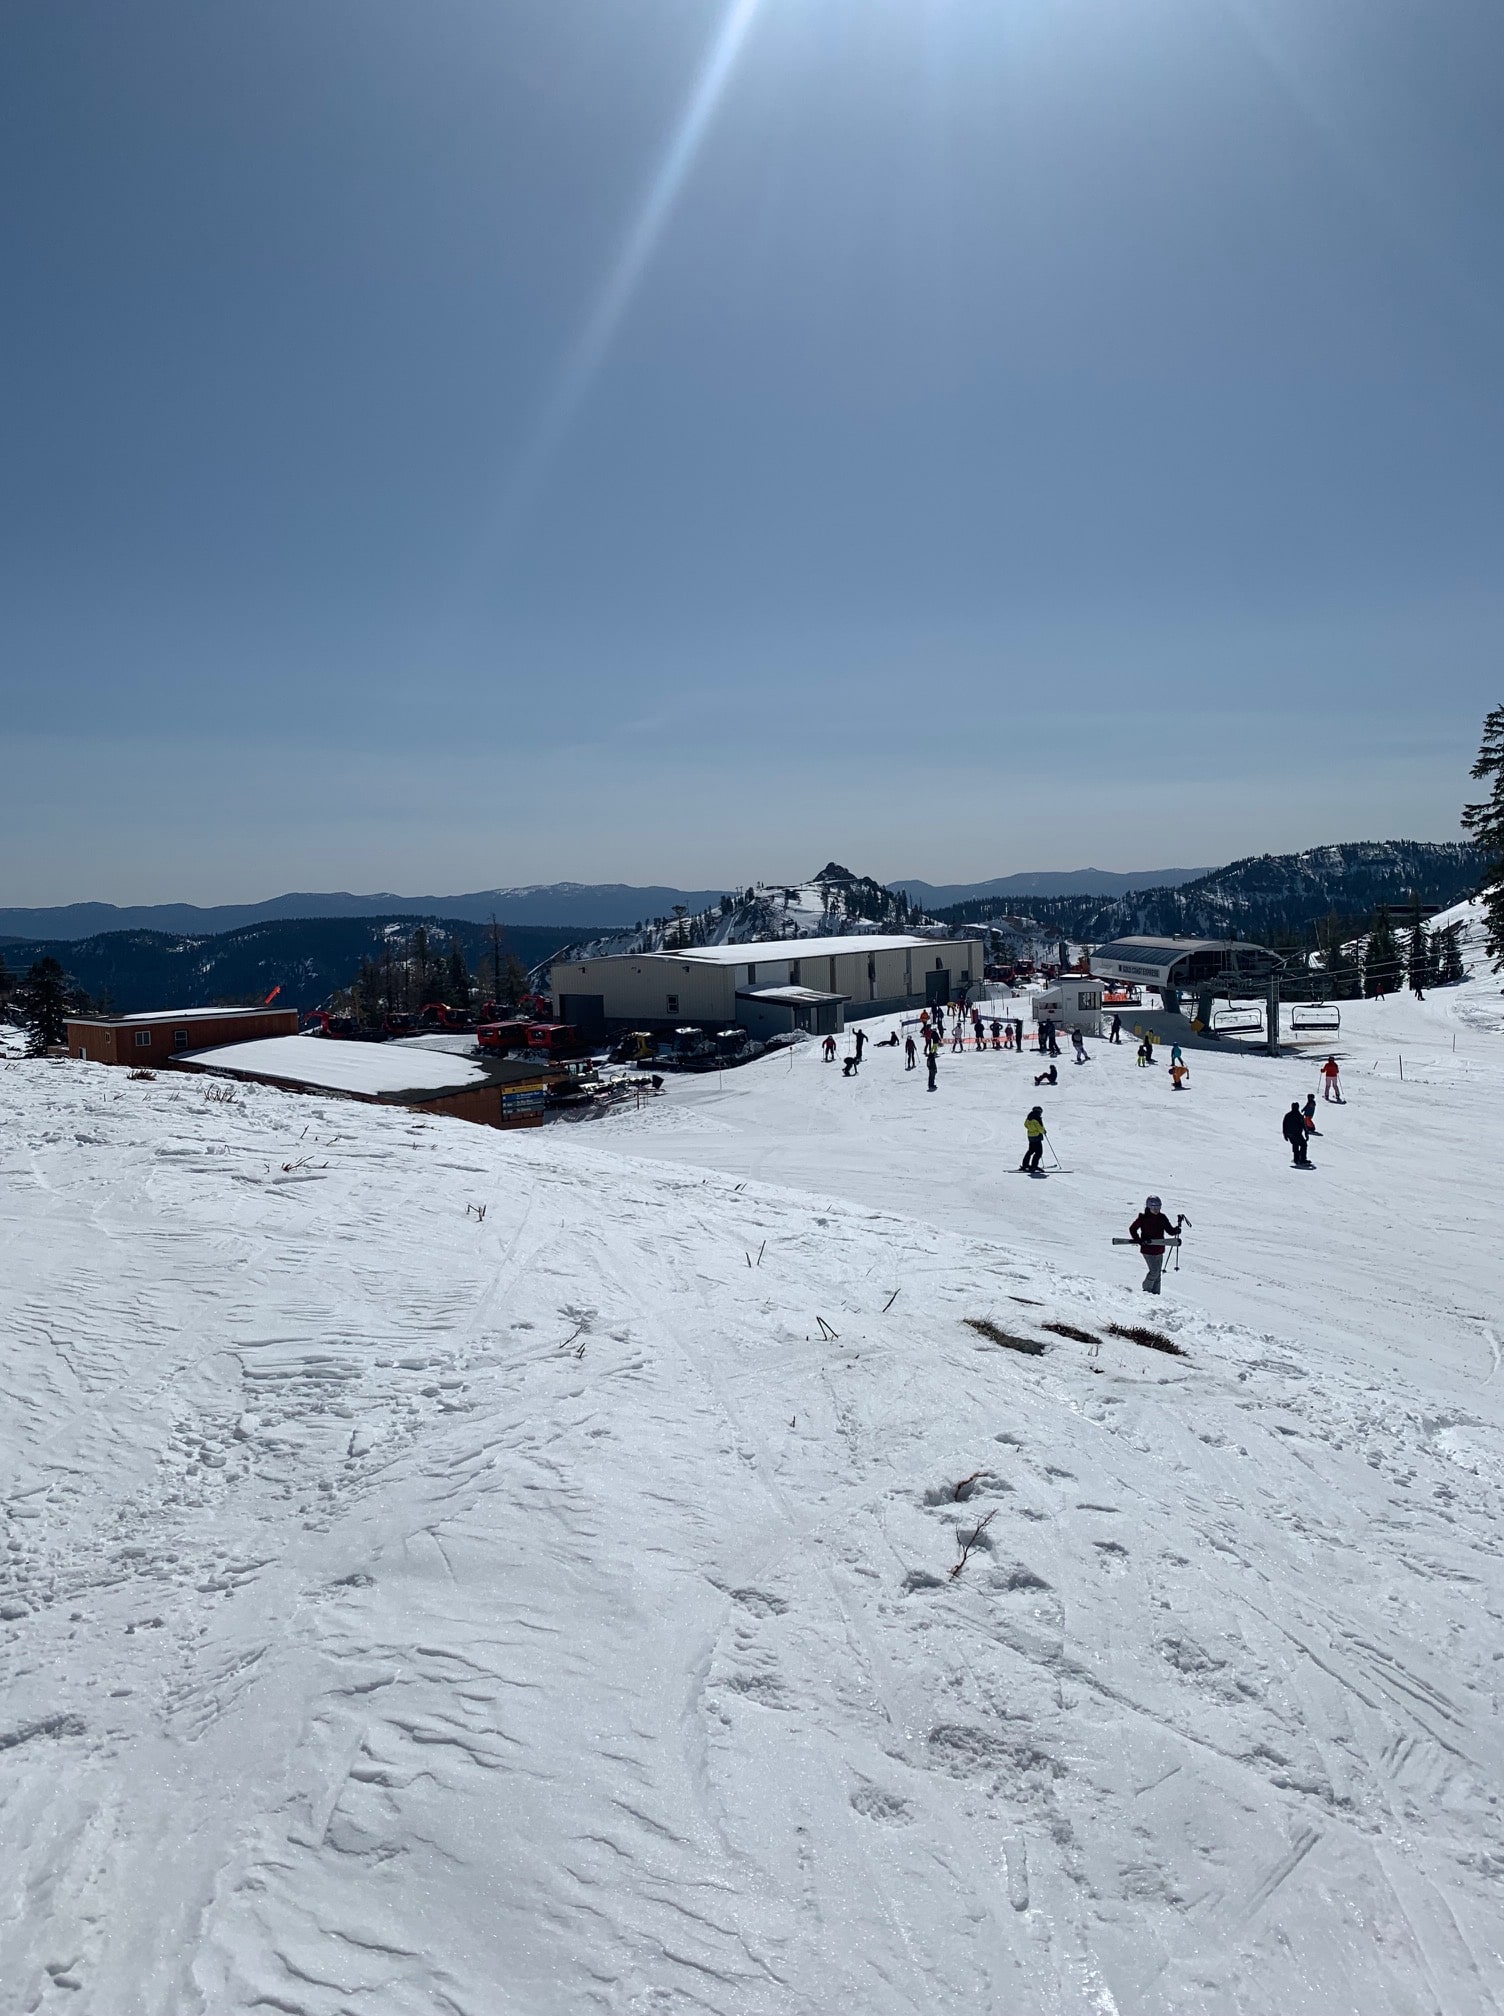 Top of mtn Squaw Valley